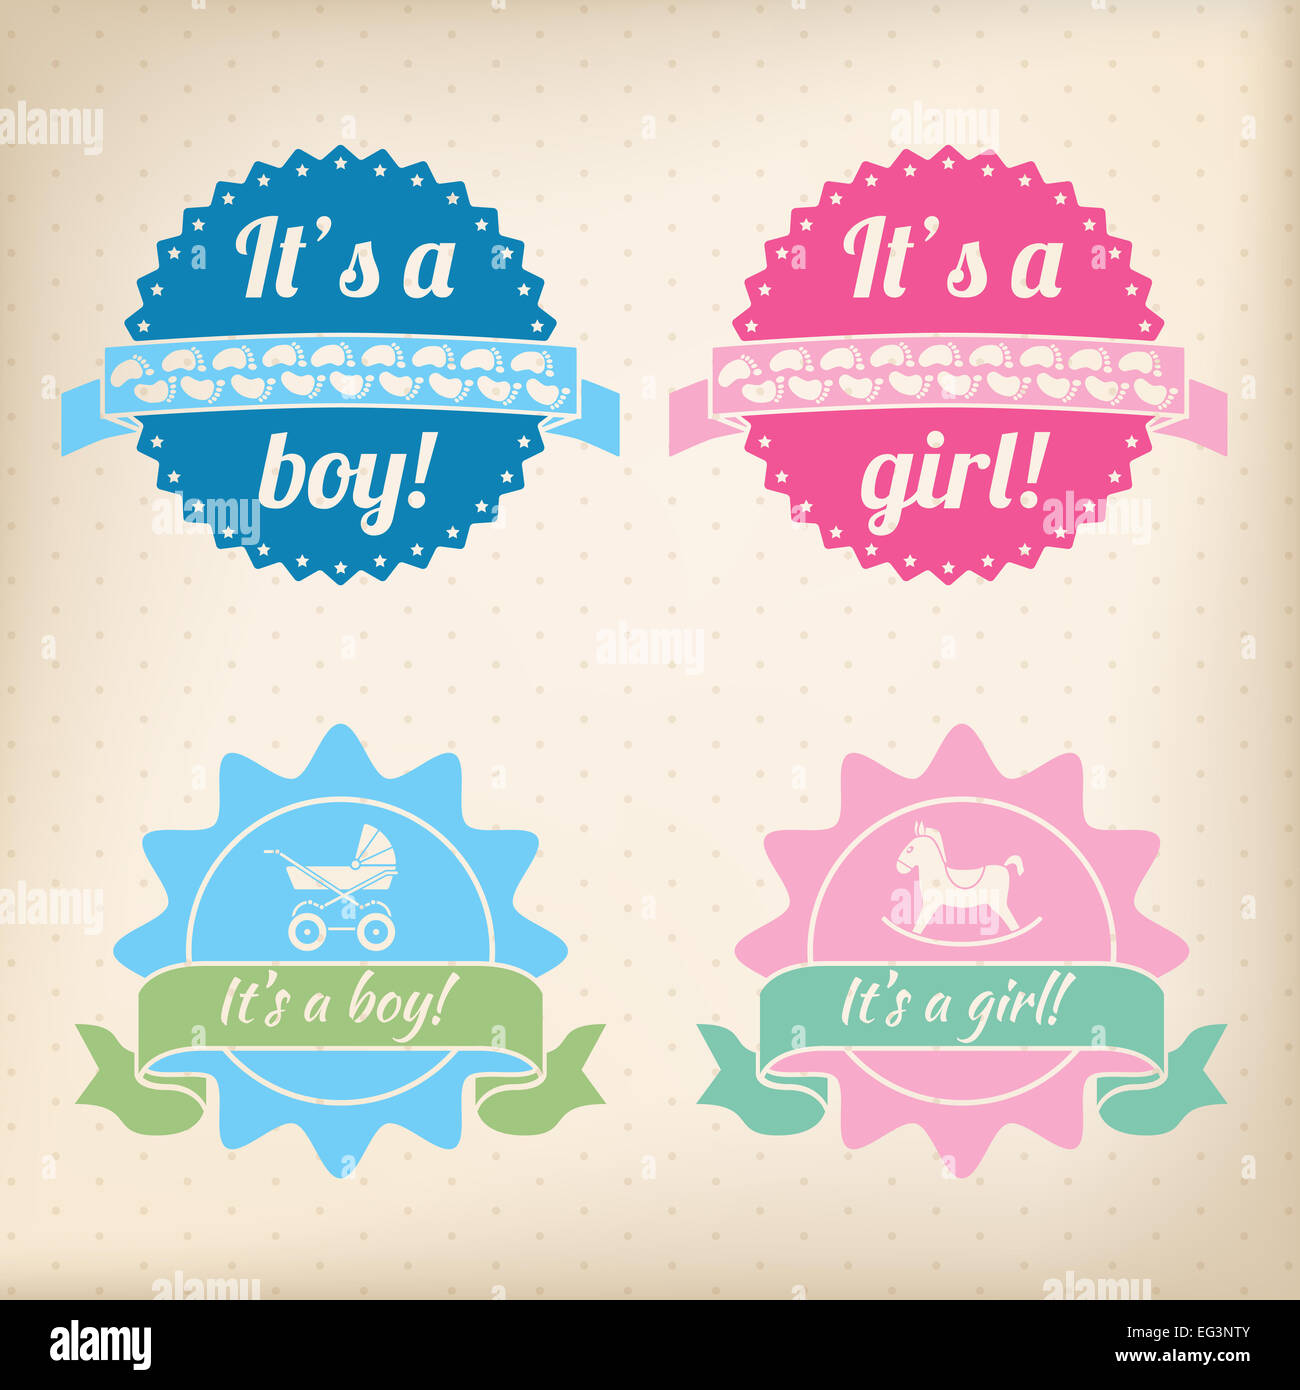 Newborn baby badges for girls and boys Stock Photo